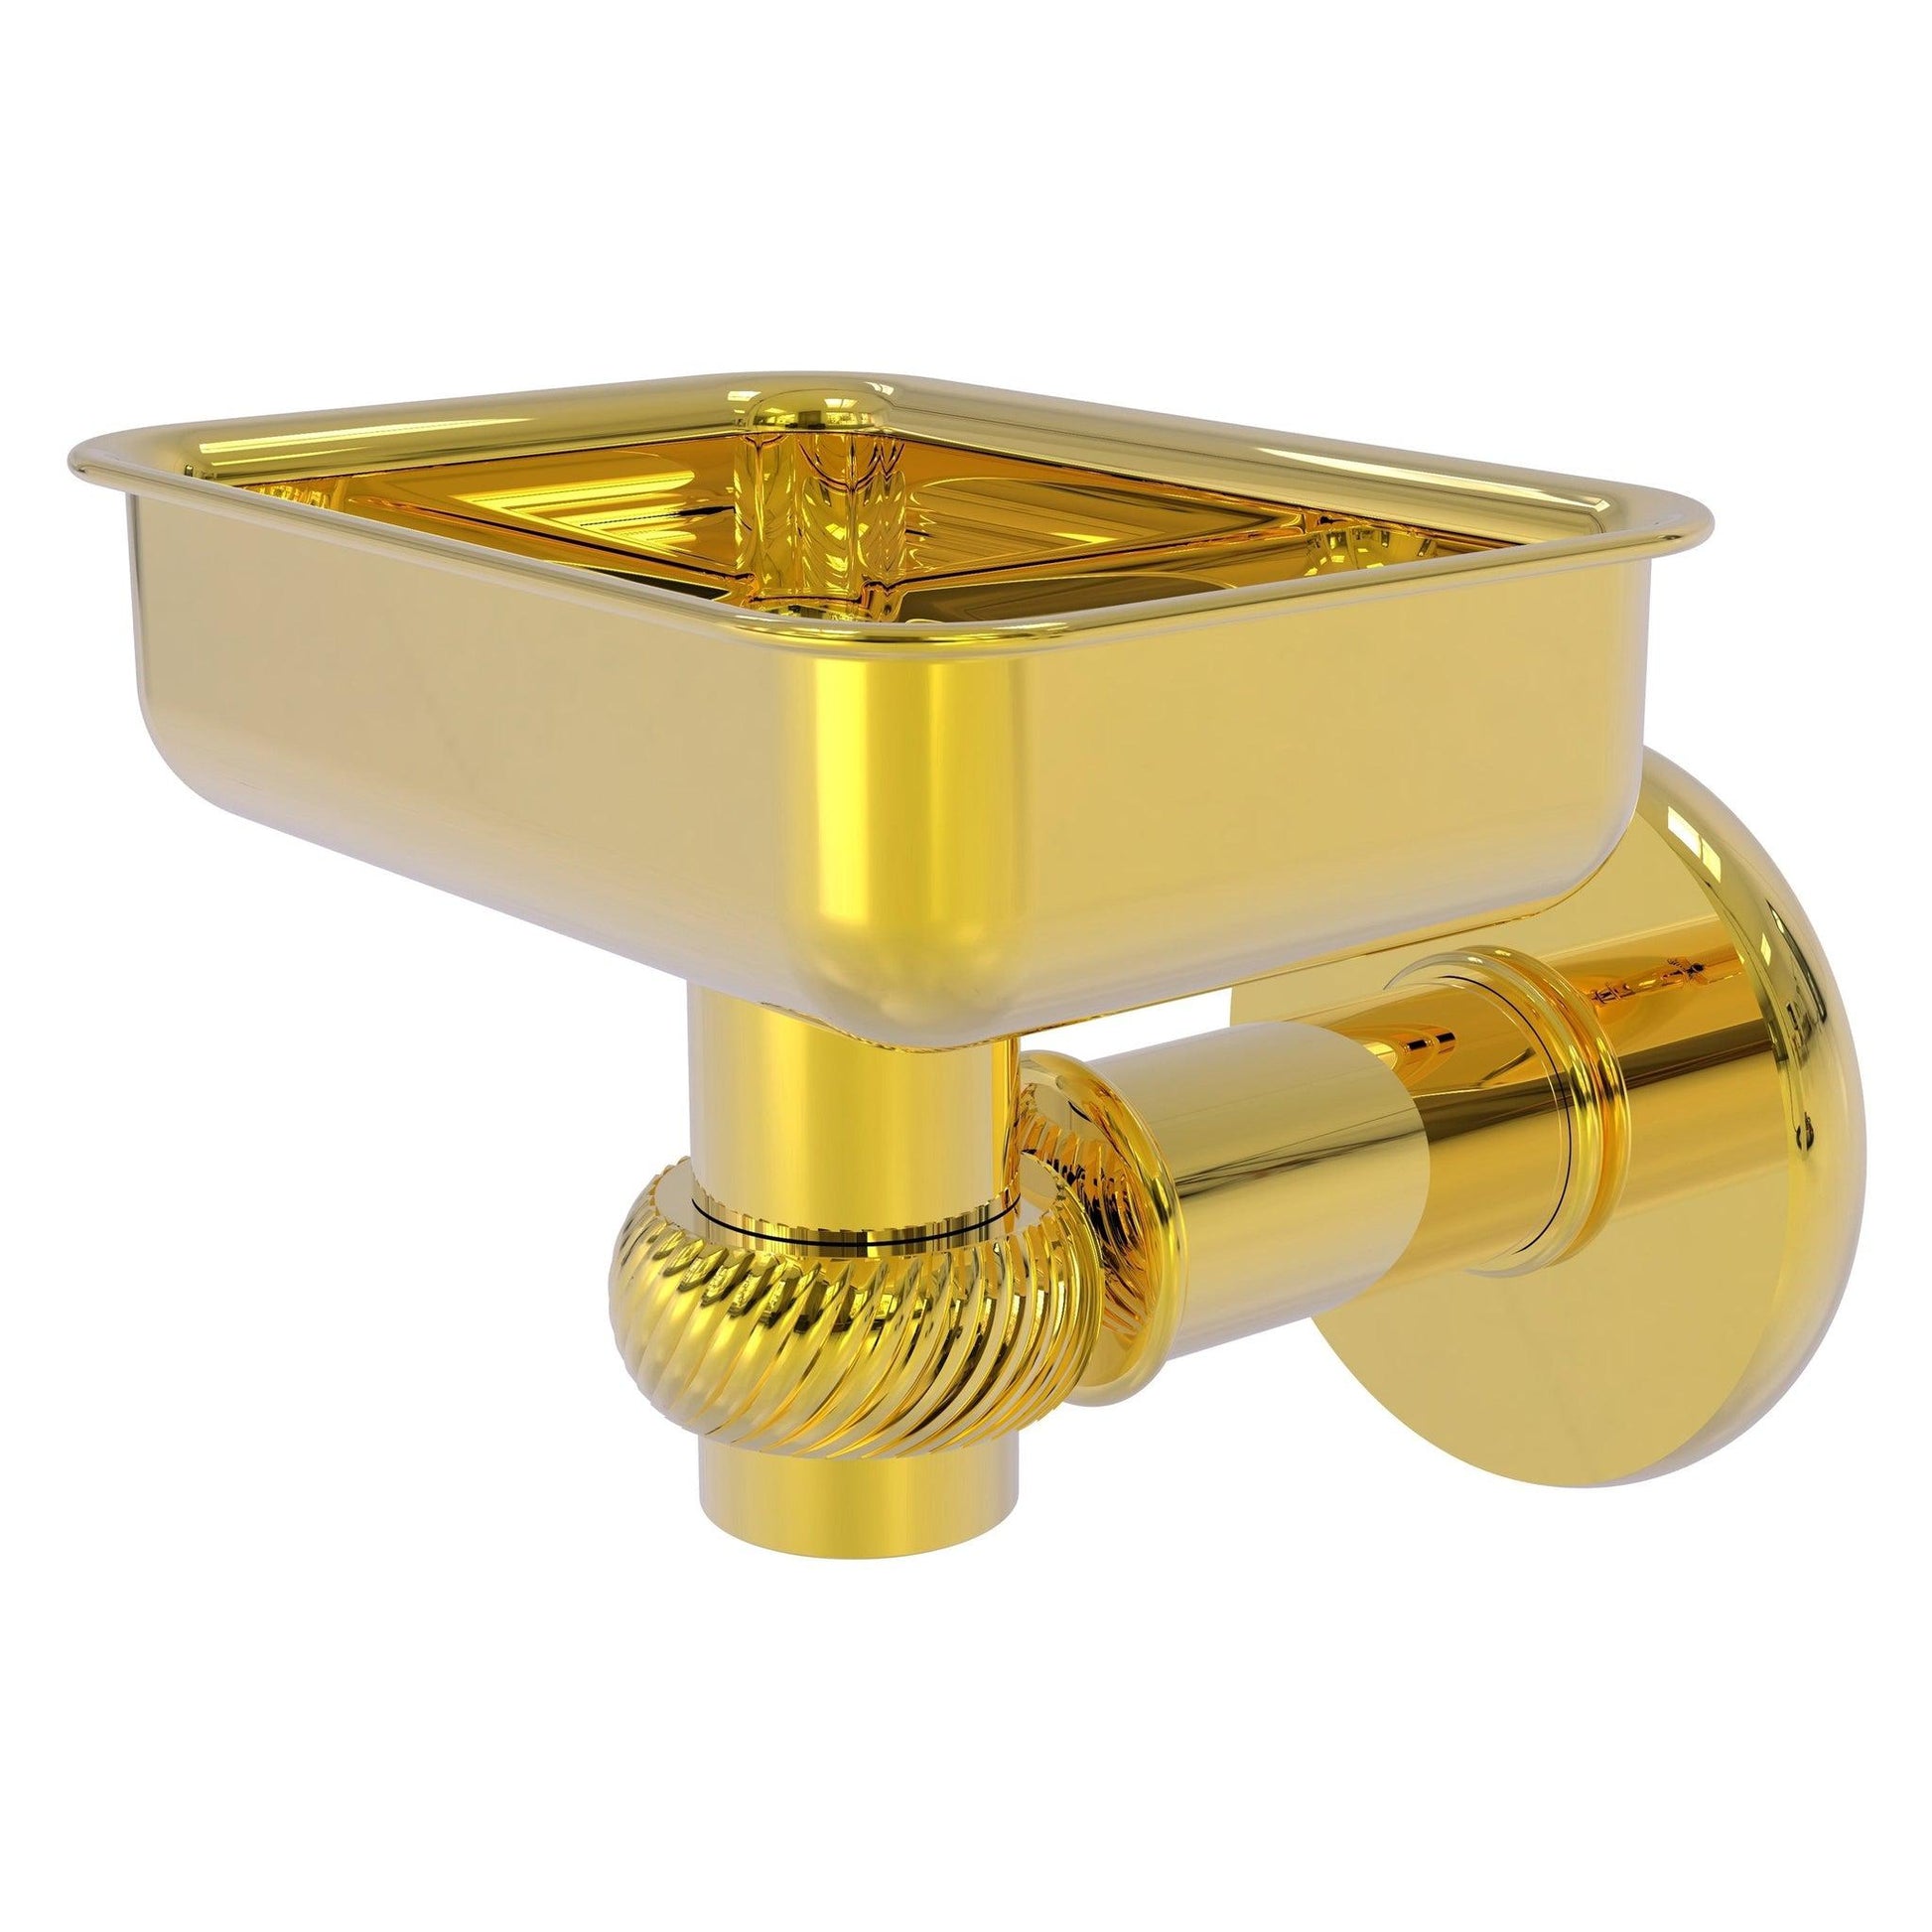 Allied Brass Continental 4.5" x 3.5" Polished Brass Solid Brass Wall-Mounted Soap Dish Holder with Twist Accents